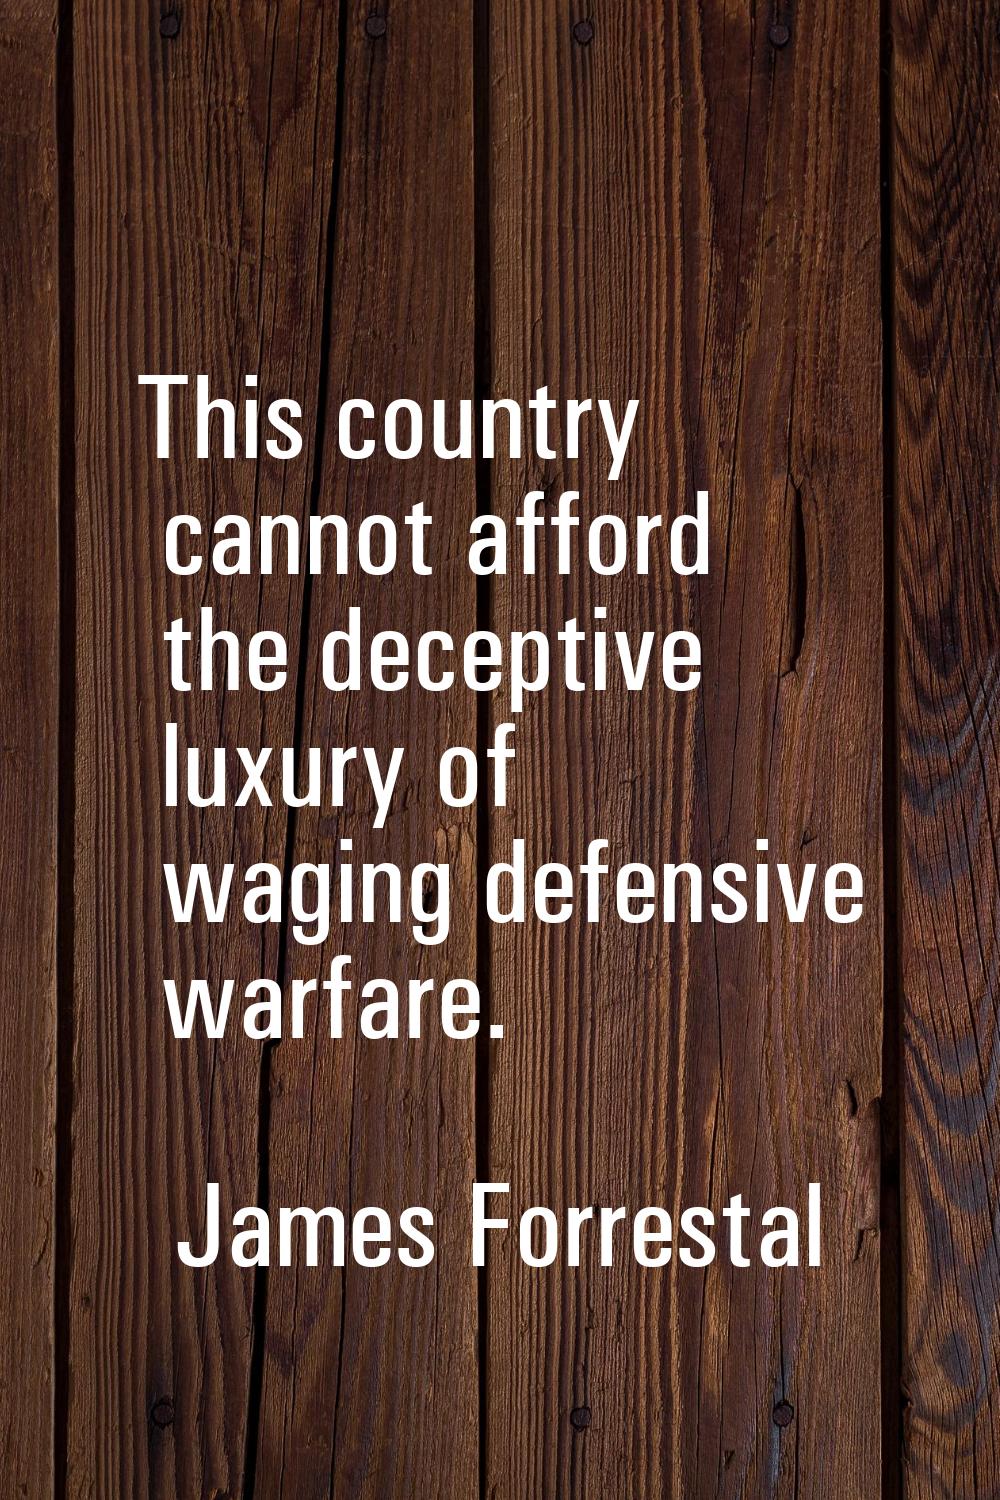 This country cannot afford the deceptive luxury of waging defensive warfare.